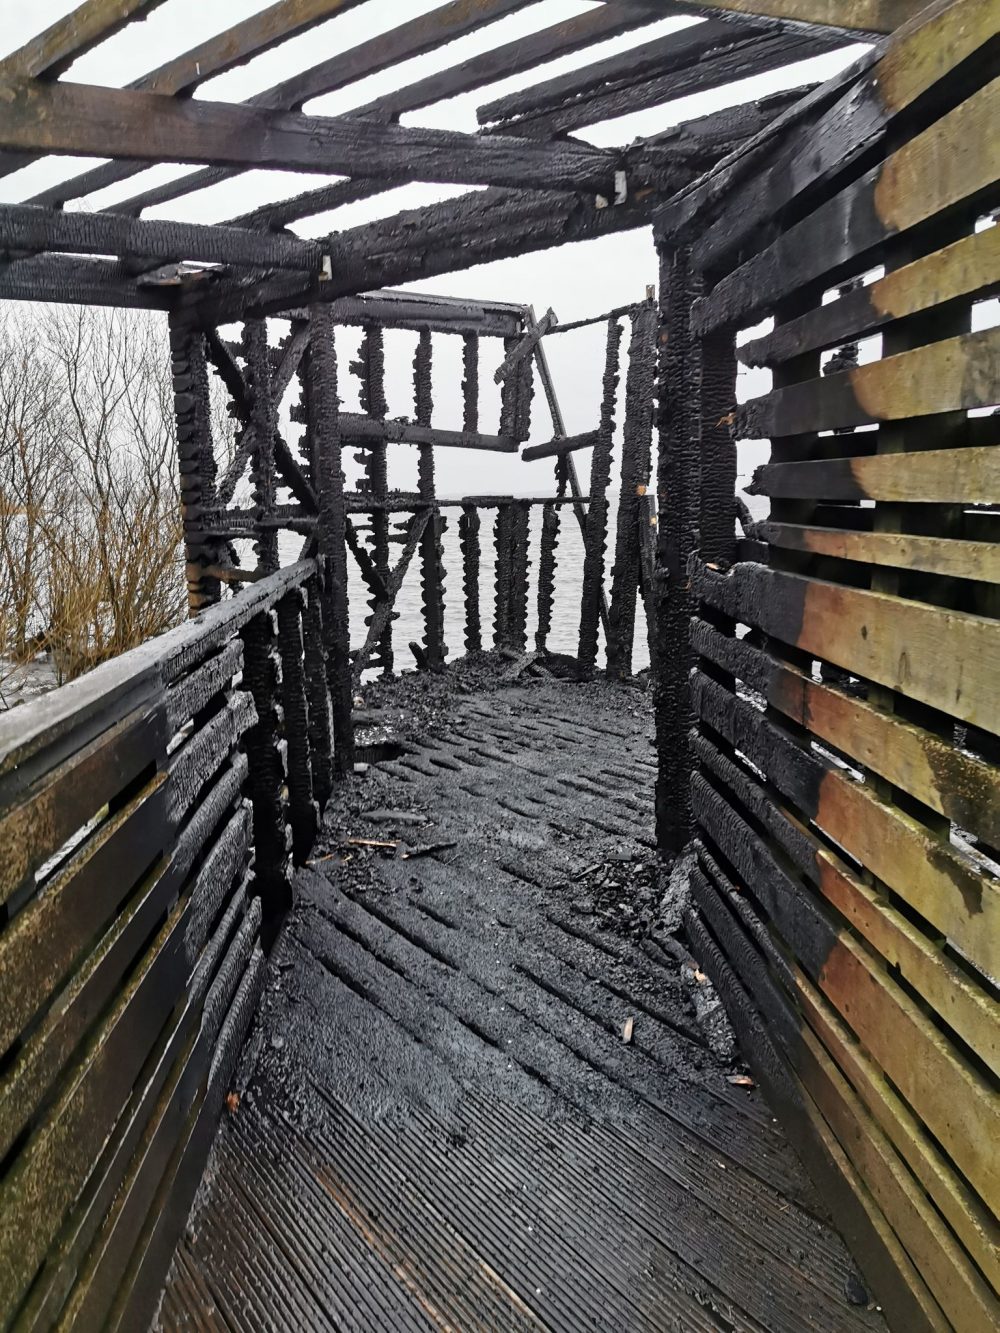 The Loch Leven Hide after the fire - Court and Crime News Scotland